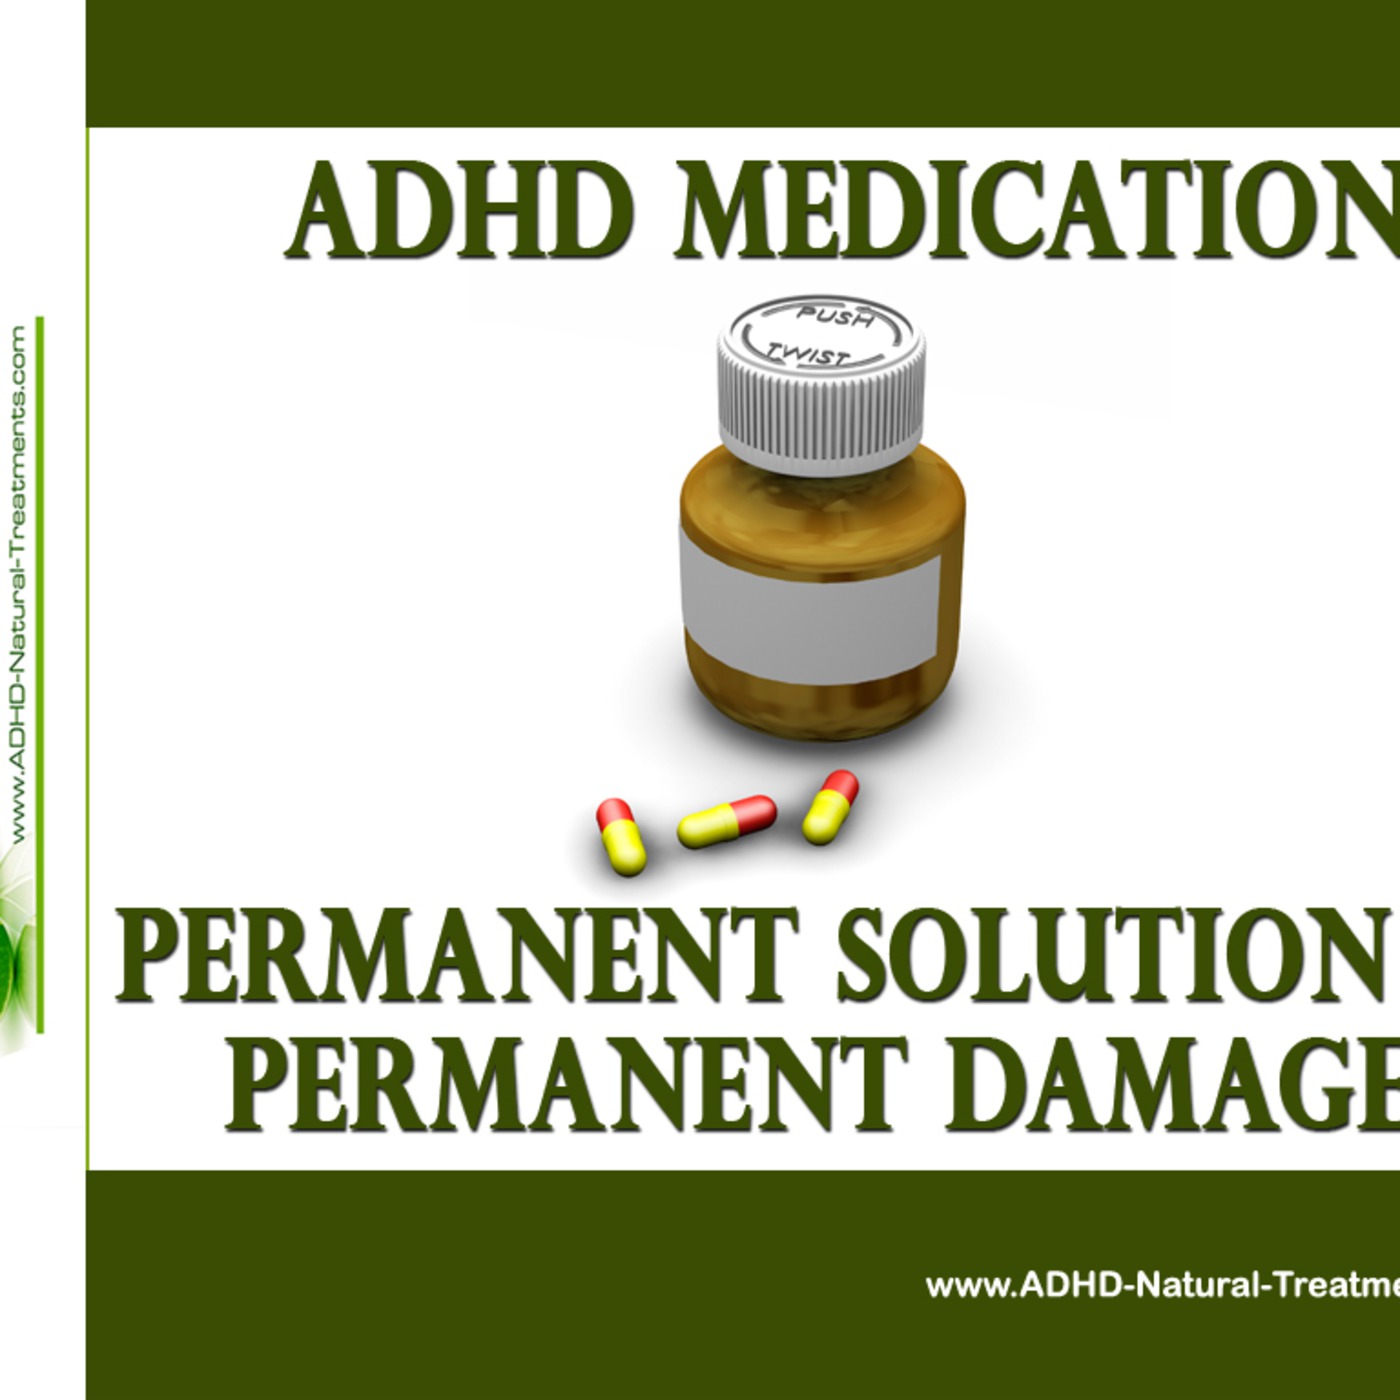 ADHD Medication - Permanent Solution Or Permanent Damage ?